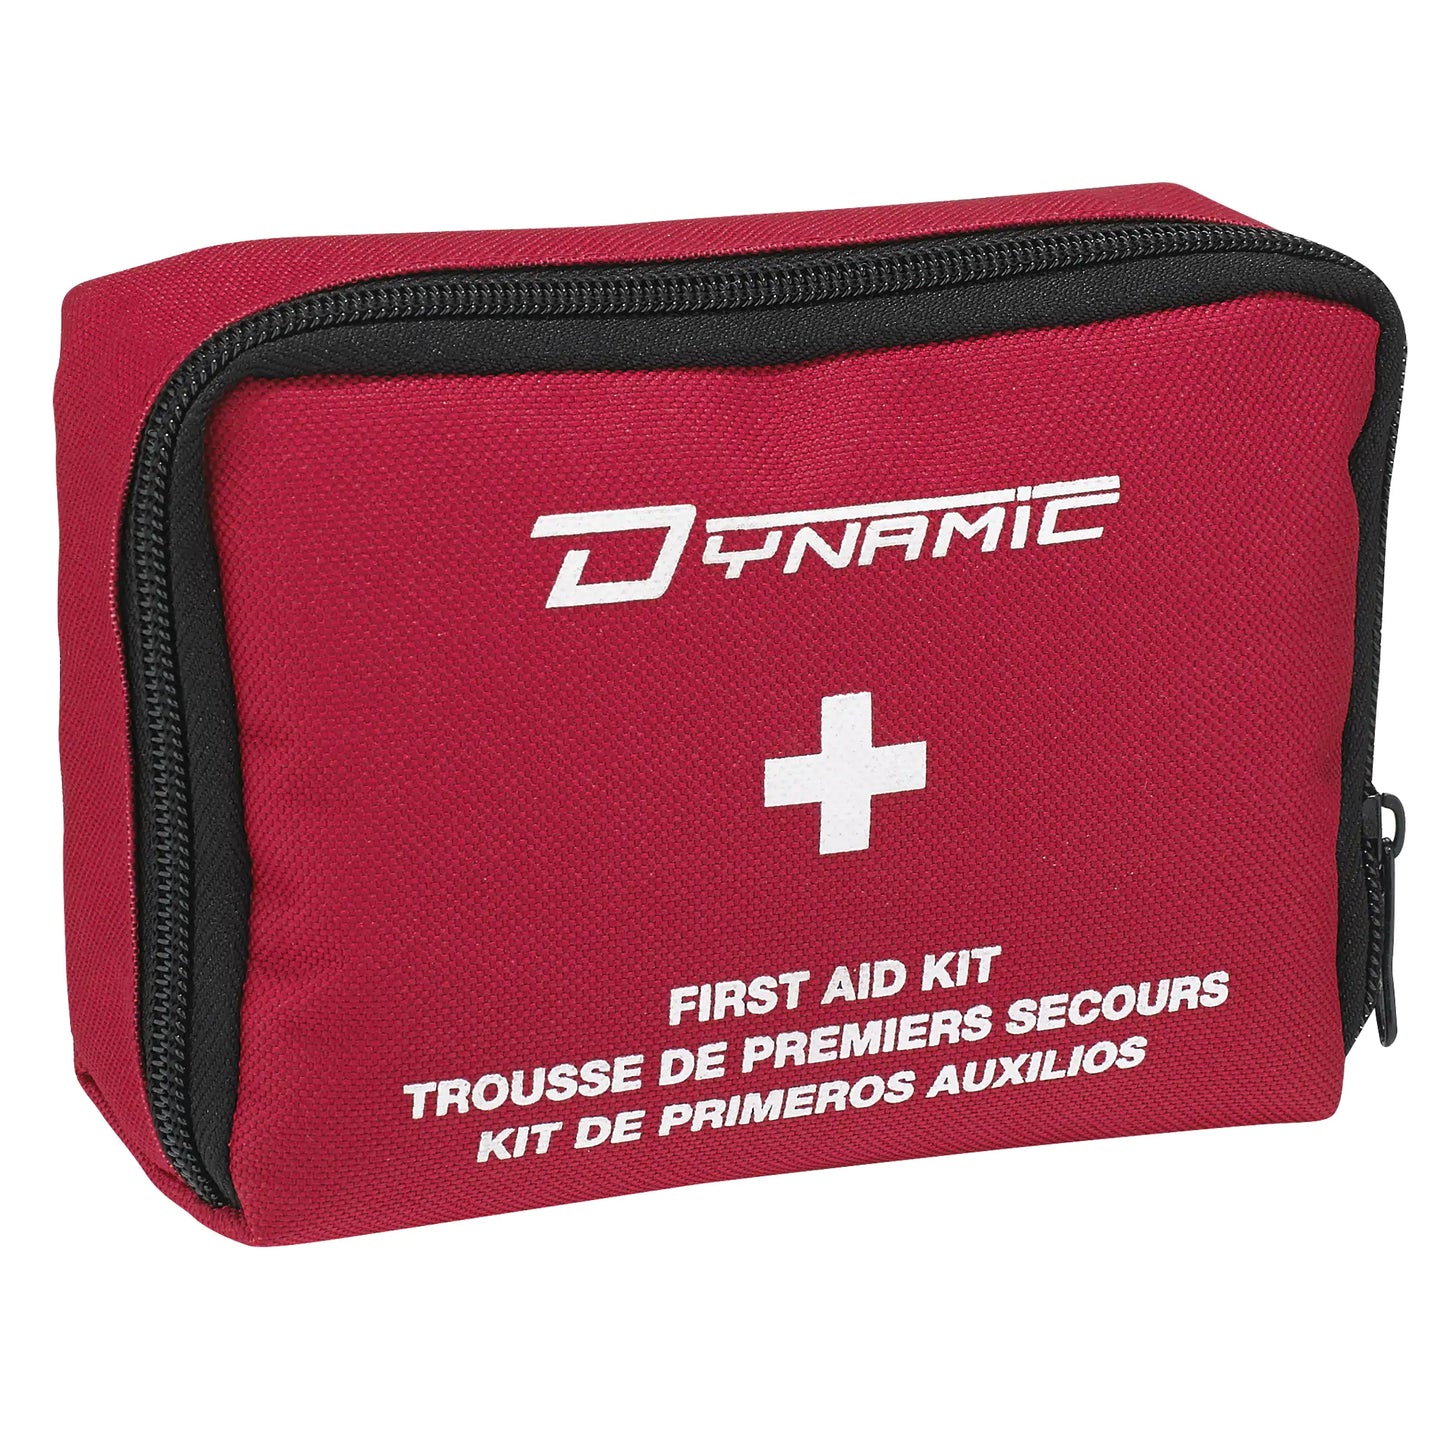 Personal First Aid Kit, CSA Type 1 SGR327